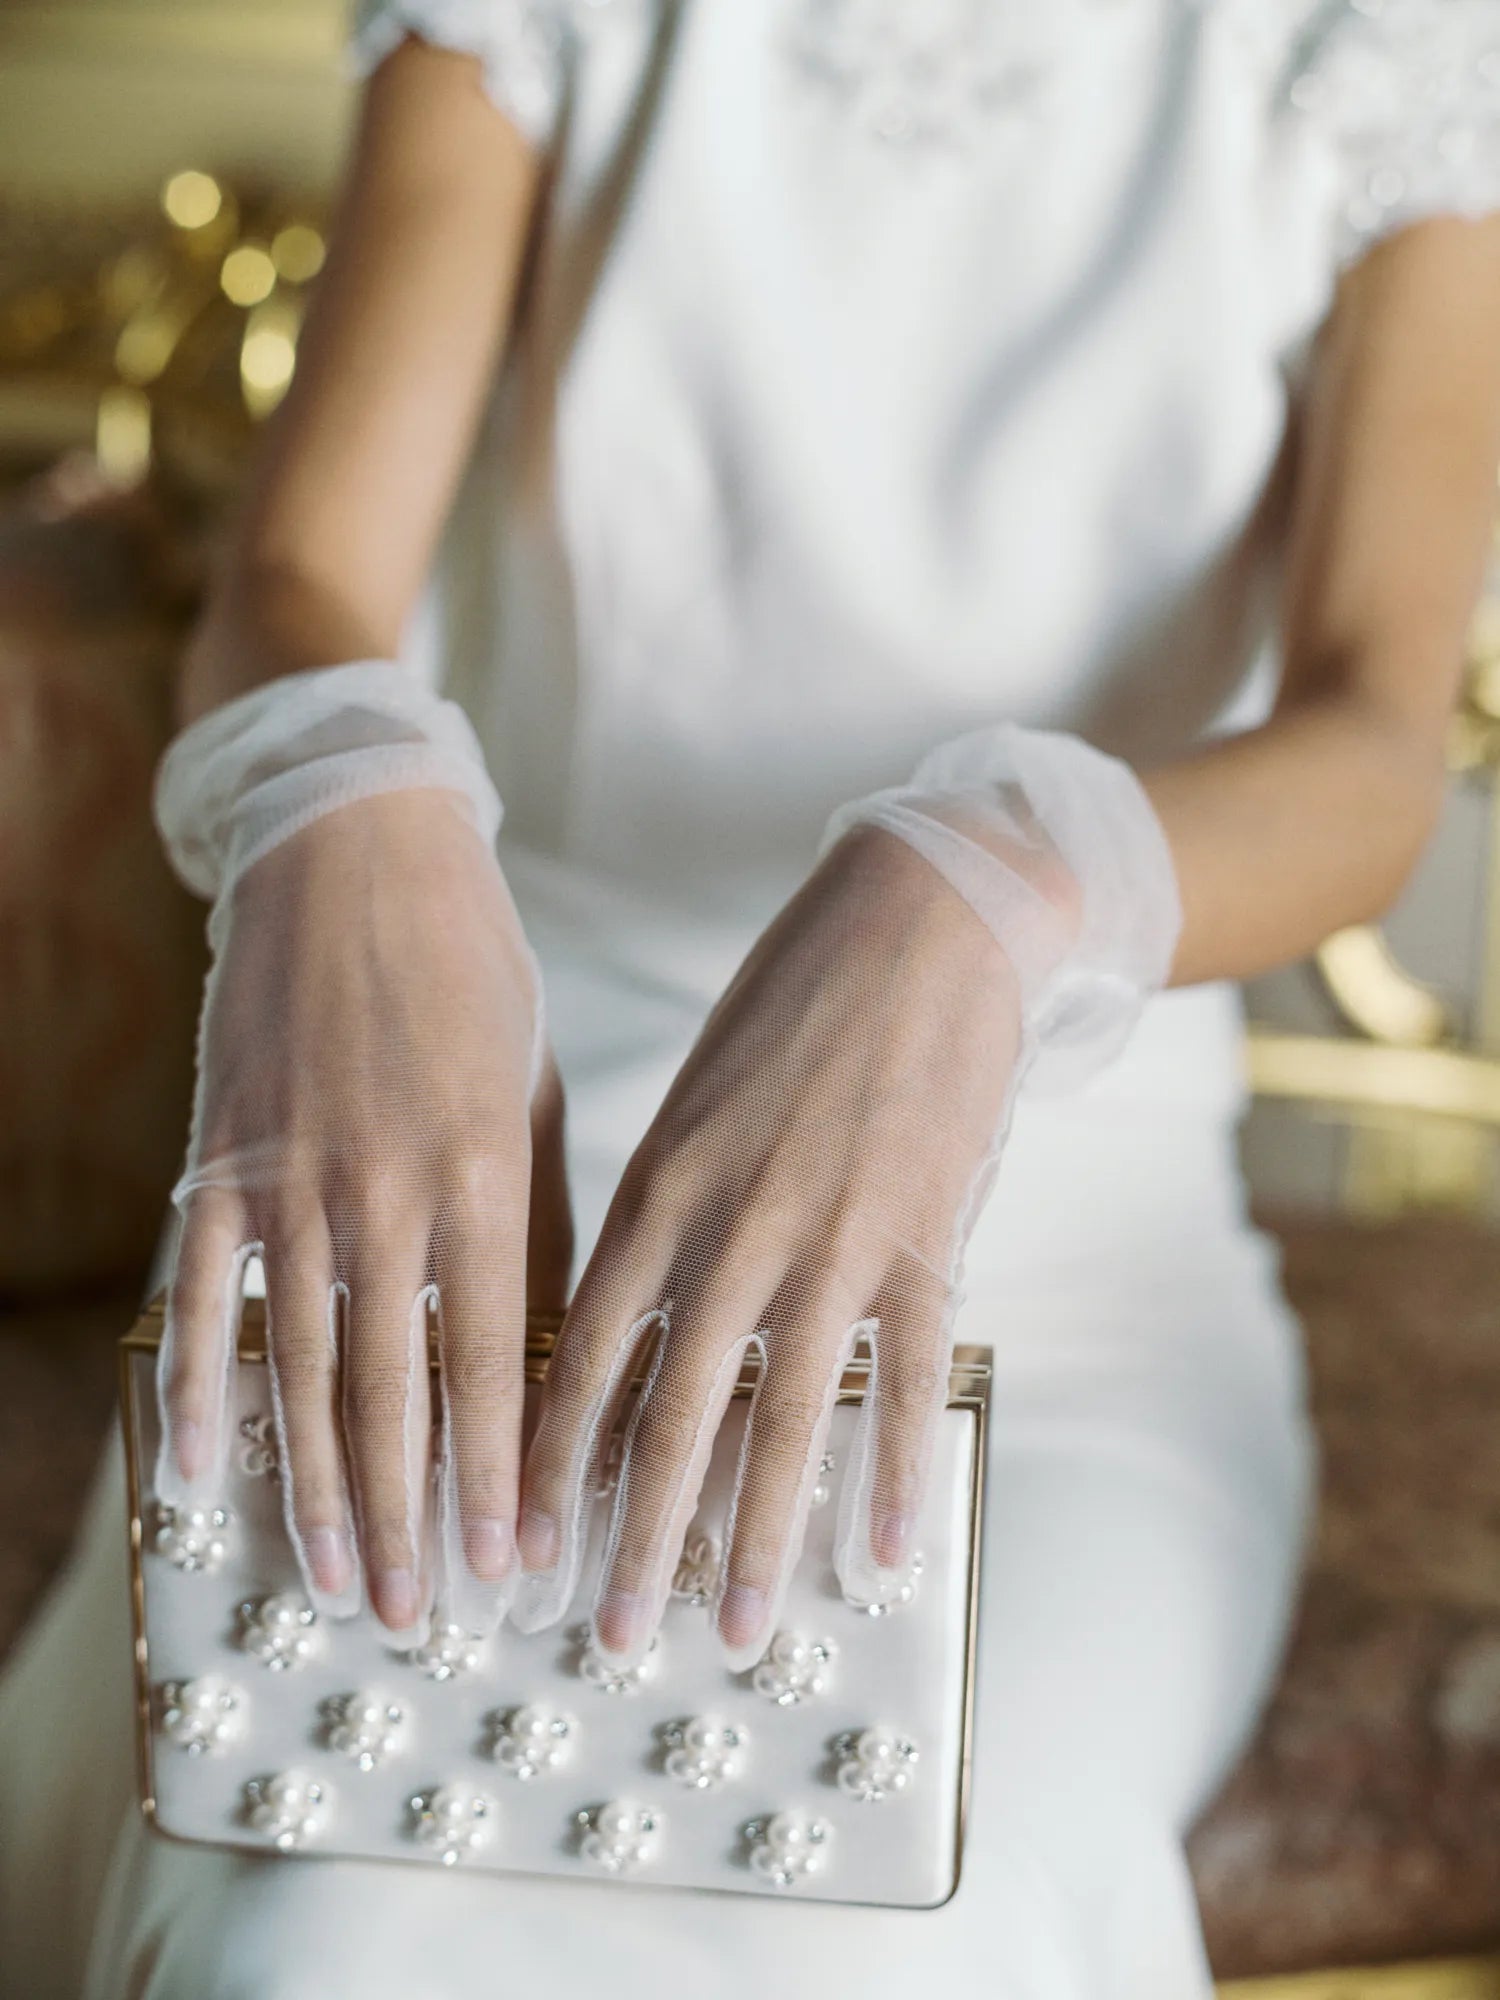 Woman in wedding dress wearing tulle white gloves holding white satin clutch.